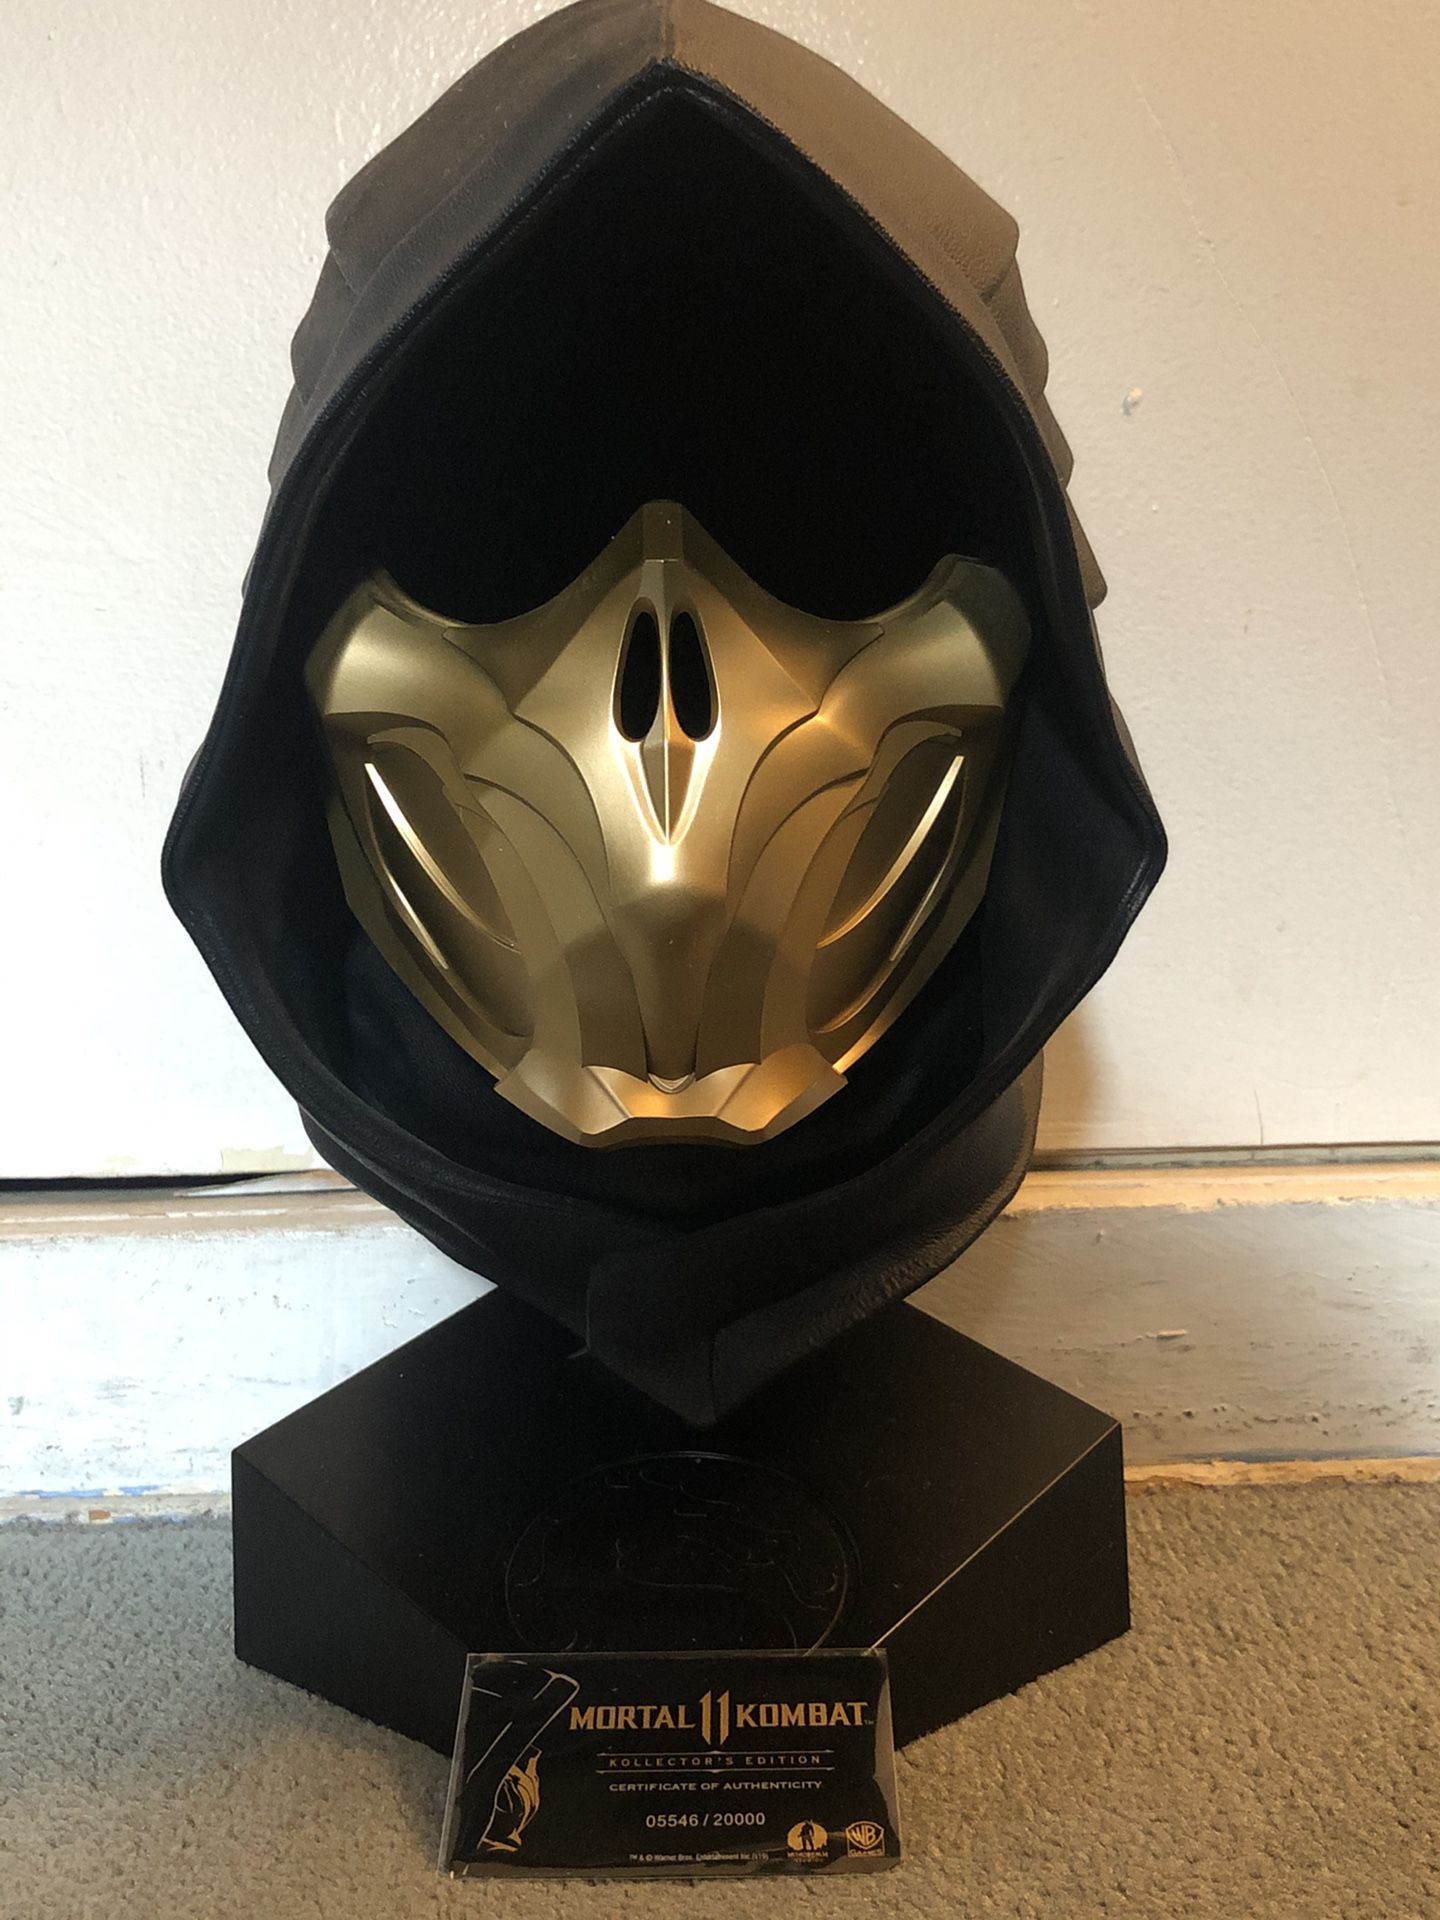 Mortal Kombat 11 Scorpion Collectible Mask (with authenticated certificate)